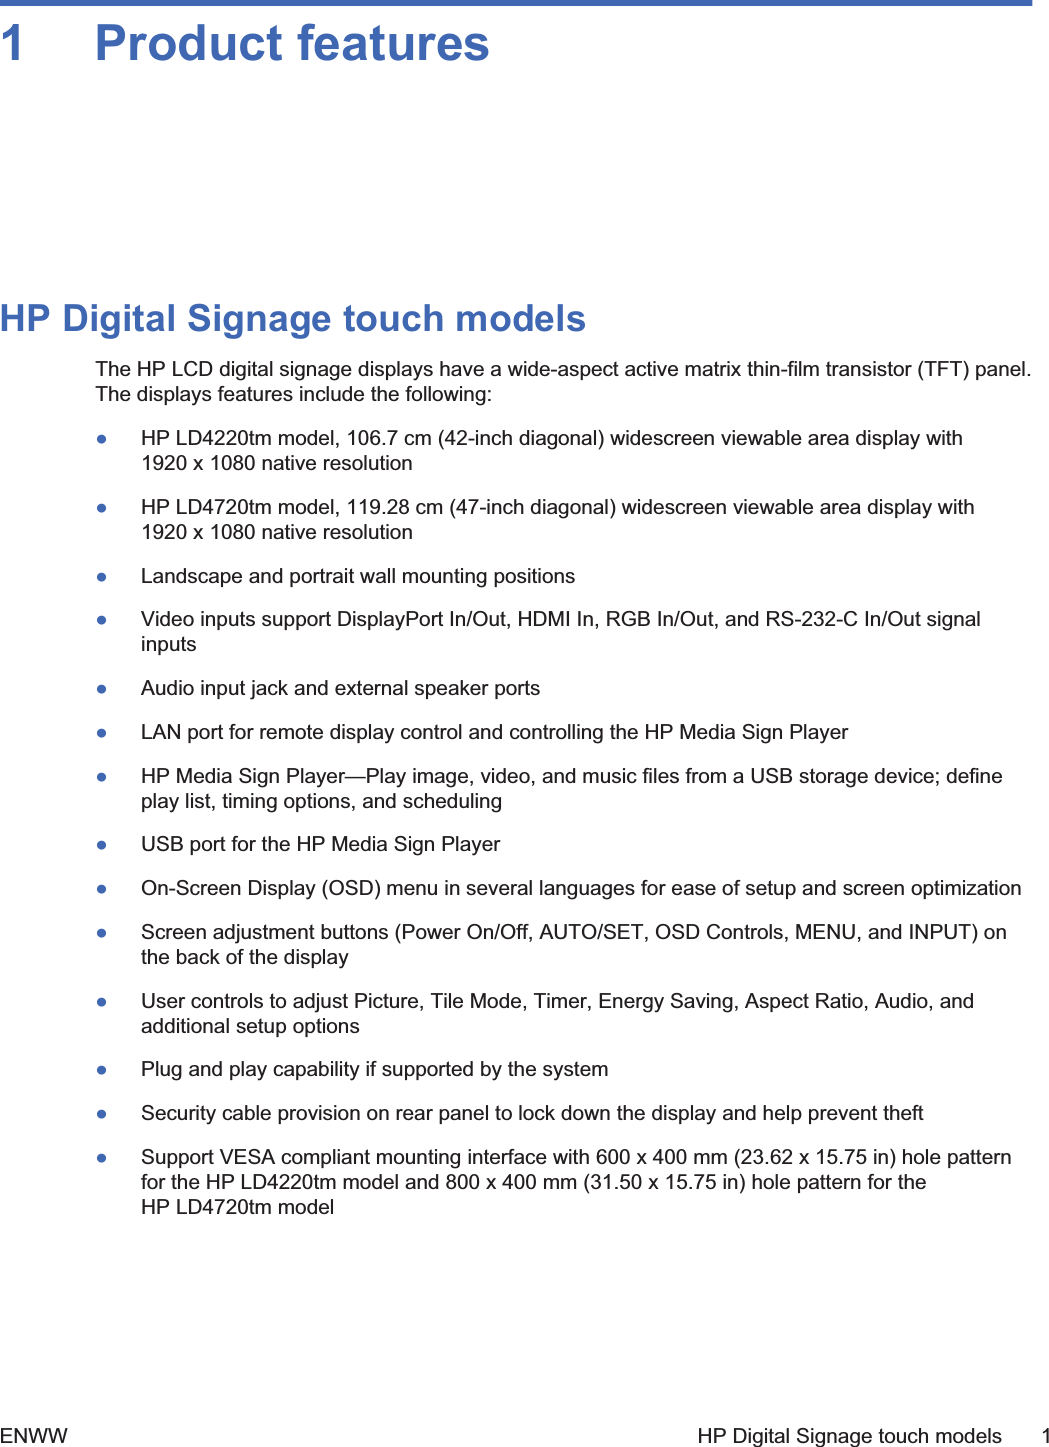 1 Product featuresHP Digital Signage touch modelsThe HP LCD digital signage displays have a wide-aspect active matrix thin-film transistor (TFT) panel.The displays features include the following:łHP LD4220tm model, 106.7 cm (42-inch diagonal) widescreen viewable area display with1920 x 1080 native resolutionłHP LD4720tm model, 119.28 cm (47-inch diagonal) widescreen viewable area display with1920 x 1080 native resolutionłLandscape and portrait wall mounting positionsłVideo inputs support DisplayPort In/Out, HDMI In, RGB In/Out, and RS-232-C In/Out signalinputsłAudio input jack and external speaker portsłLAN port for remote display control and controlling the HP Media Sign PlayerłHP Media Sign Player—Play image, video, and music files from a USB storage device; defineplay list, timing options, and schedulingłUSB port for the HP Media Sign PlayerłOn-Screen Display (OSD) menu in several languages for ease of setup and screen optimizationłScreen adjustment buttons (Power On/Off, AUTO/SET, OSD Controls, MENU, and INPUT) onthe back of the displayłUser controls to adjust Picture, Tile Mode, Timer, Energy Saving, Aspect Ratio, Audio, andadditional setup optionsłPlug and play capability if supported by the systemłSecurity cable provision on rear panel to lock down the display and help prevent theftłSupport VESA compliant mounting interface with 600 x 400 mm (23.62 x 15.75 in) hole patternfor the HP LD4220tm model and 800 x 400 mm (31.50 x 15.75 in) hole pattern for theHP LD4720tm modelENWW HP Digital Signage touch models 1